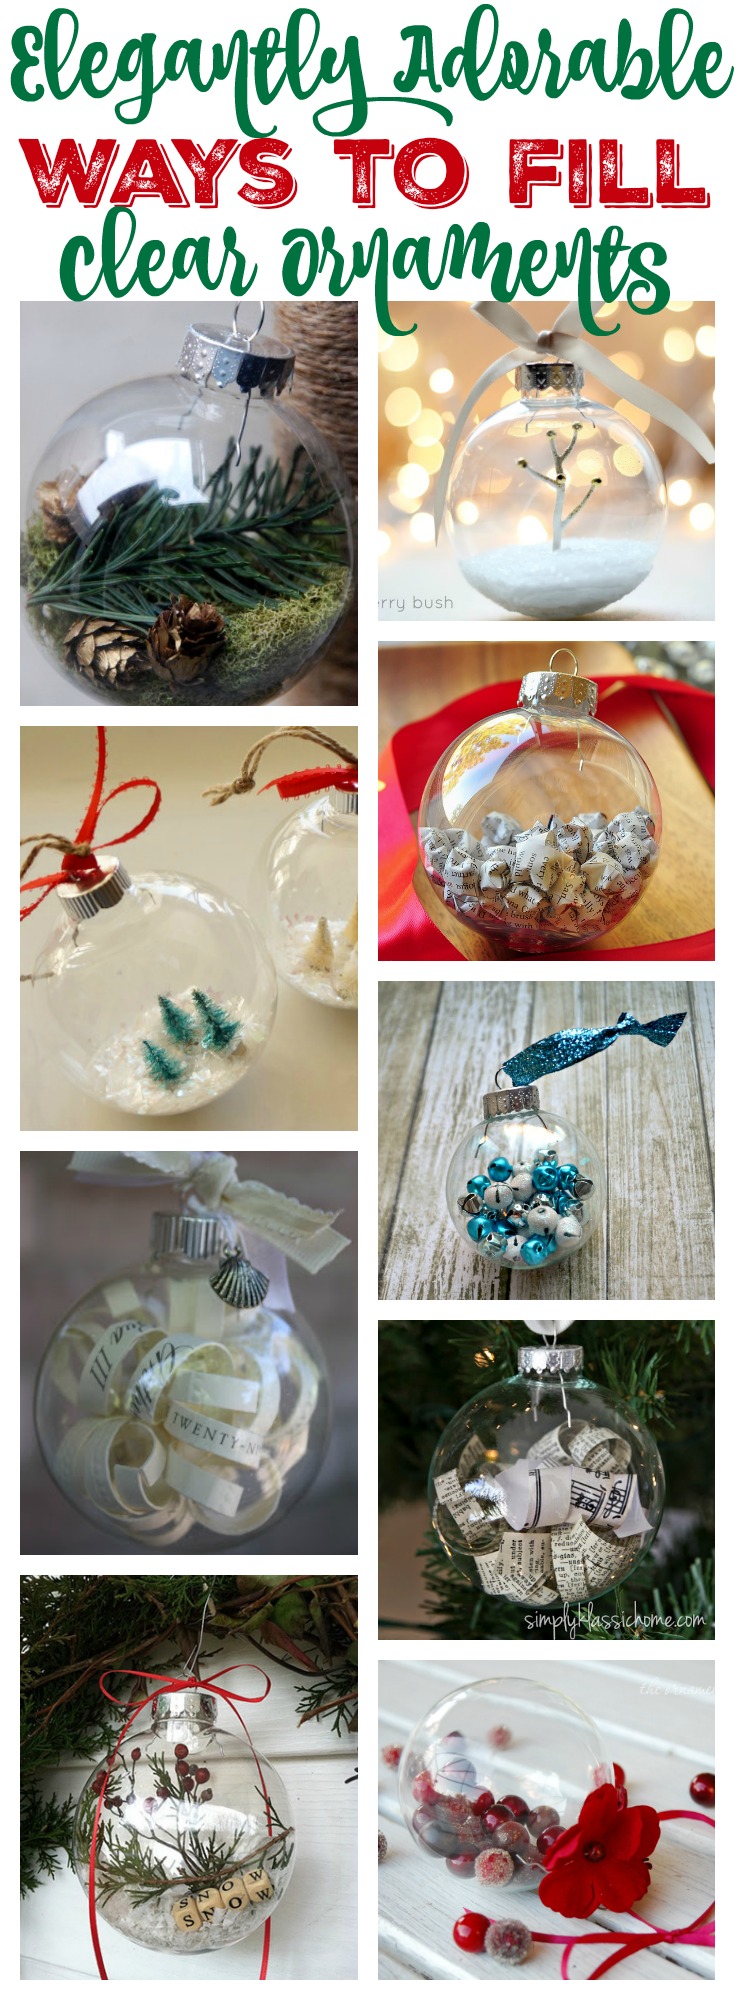 Elegantly Adorable Ways to Fill Clear Ornaments at thehappyhousie.com